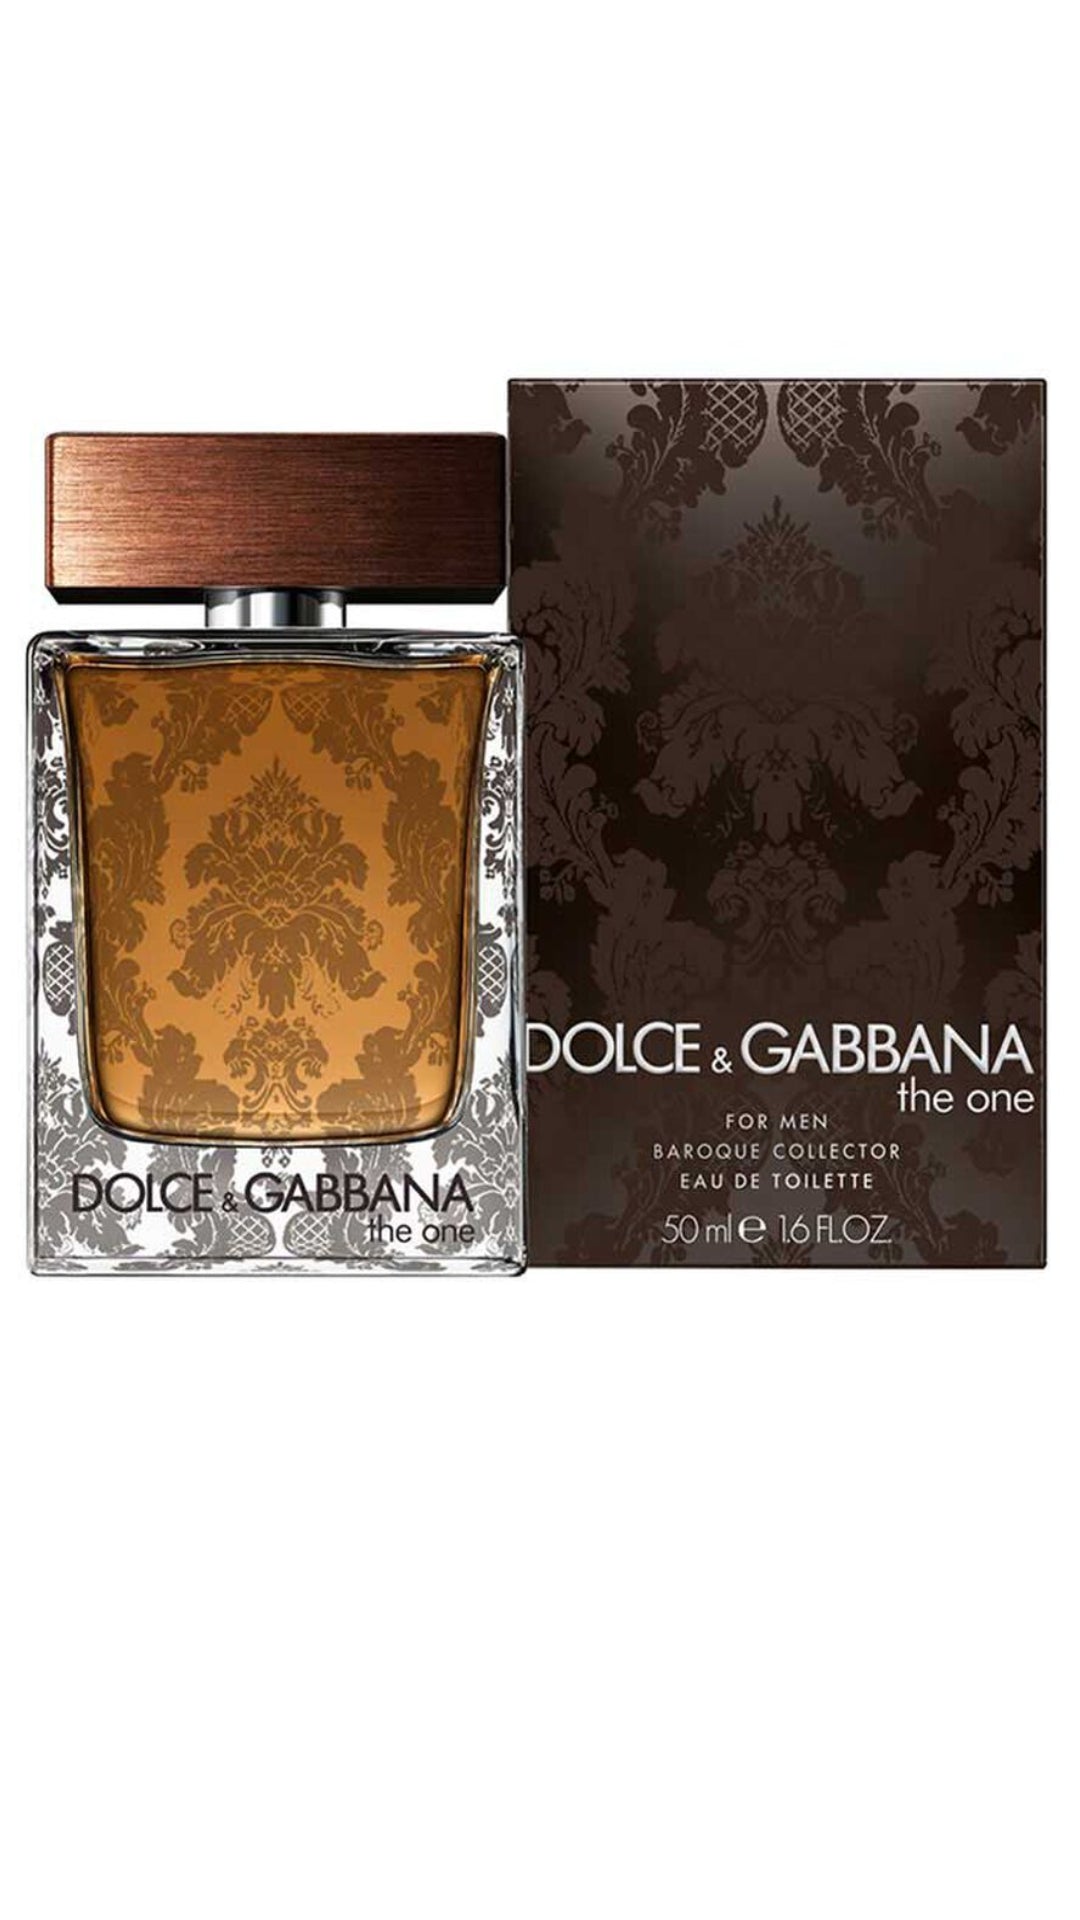 the one baroque dolce gabbana